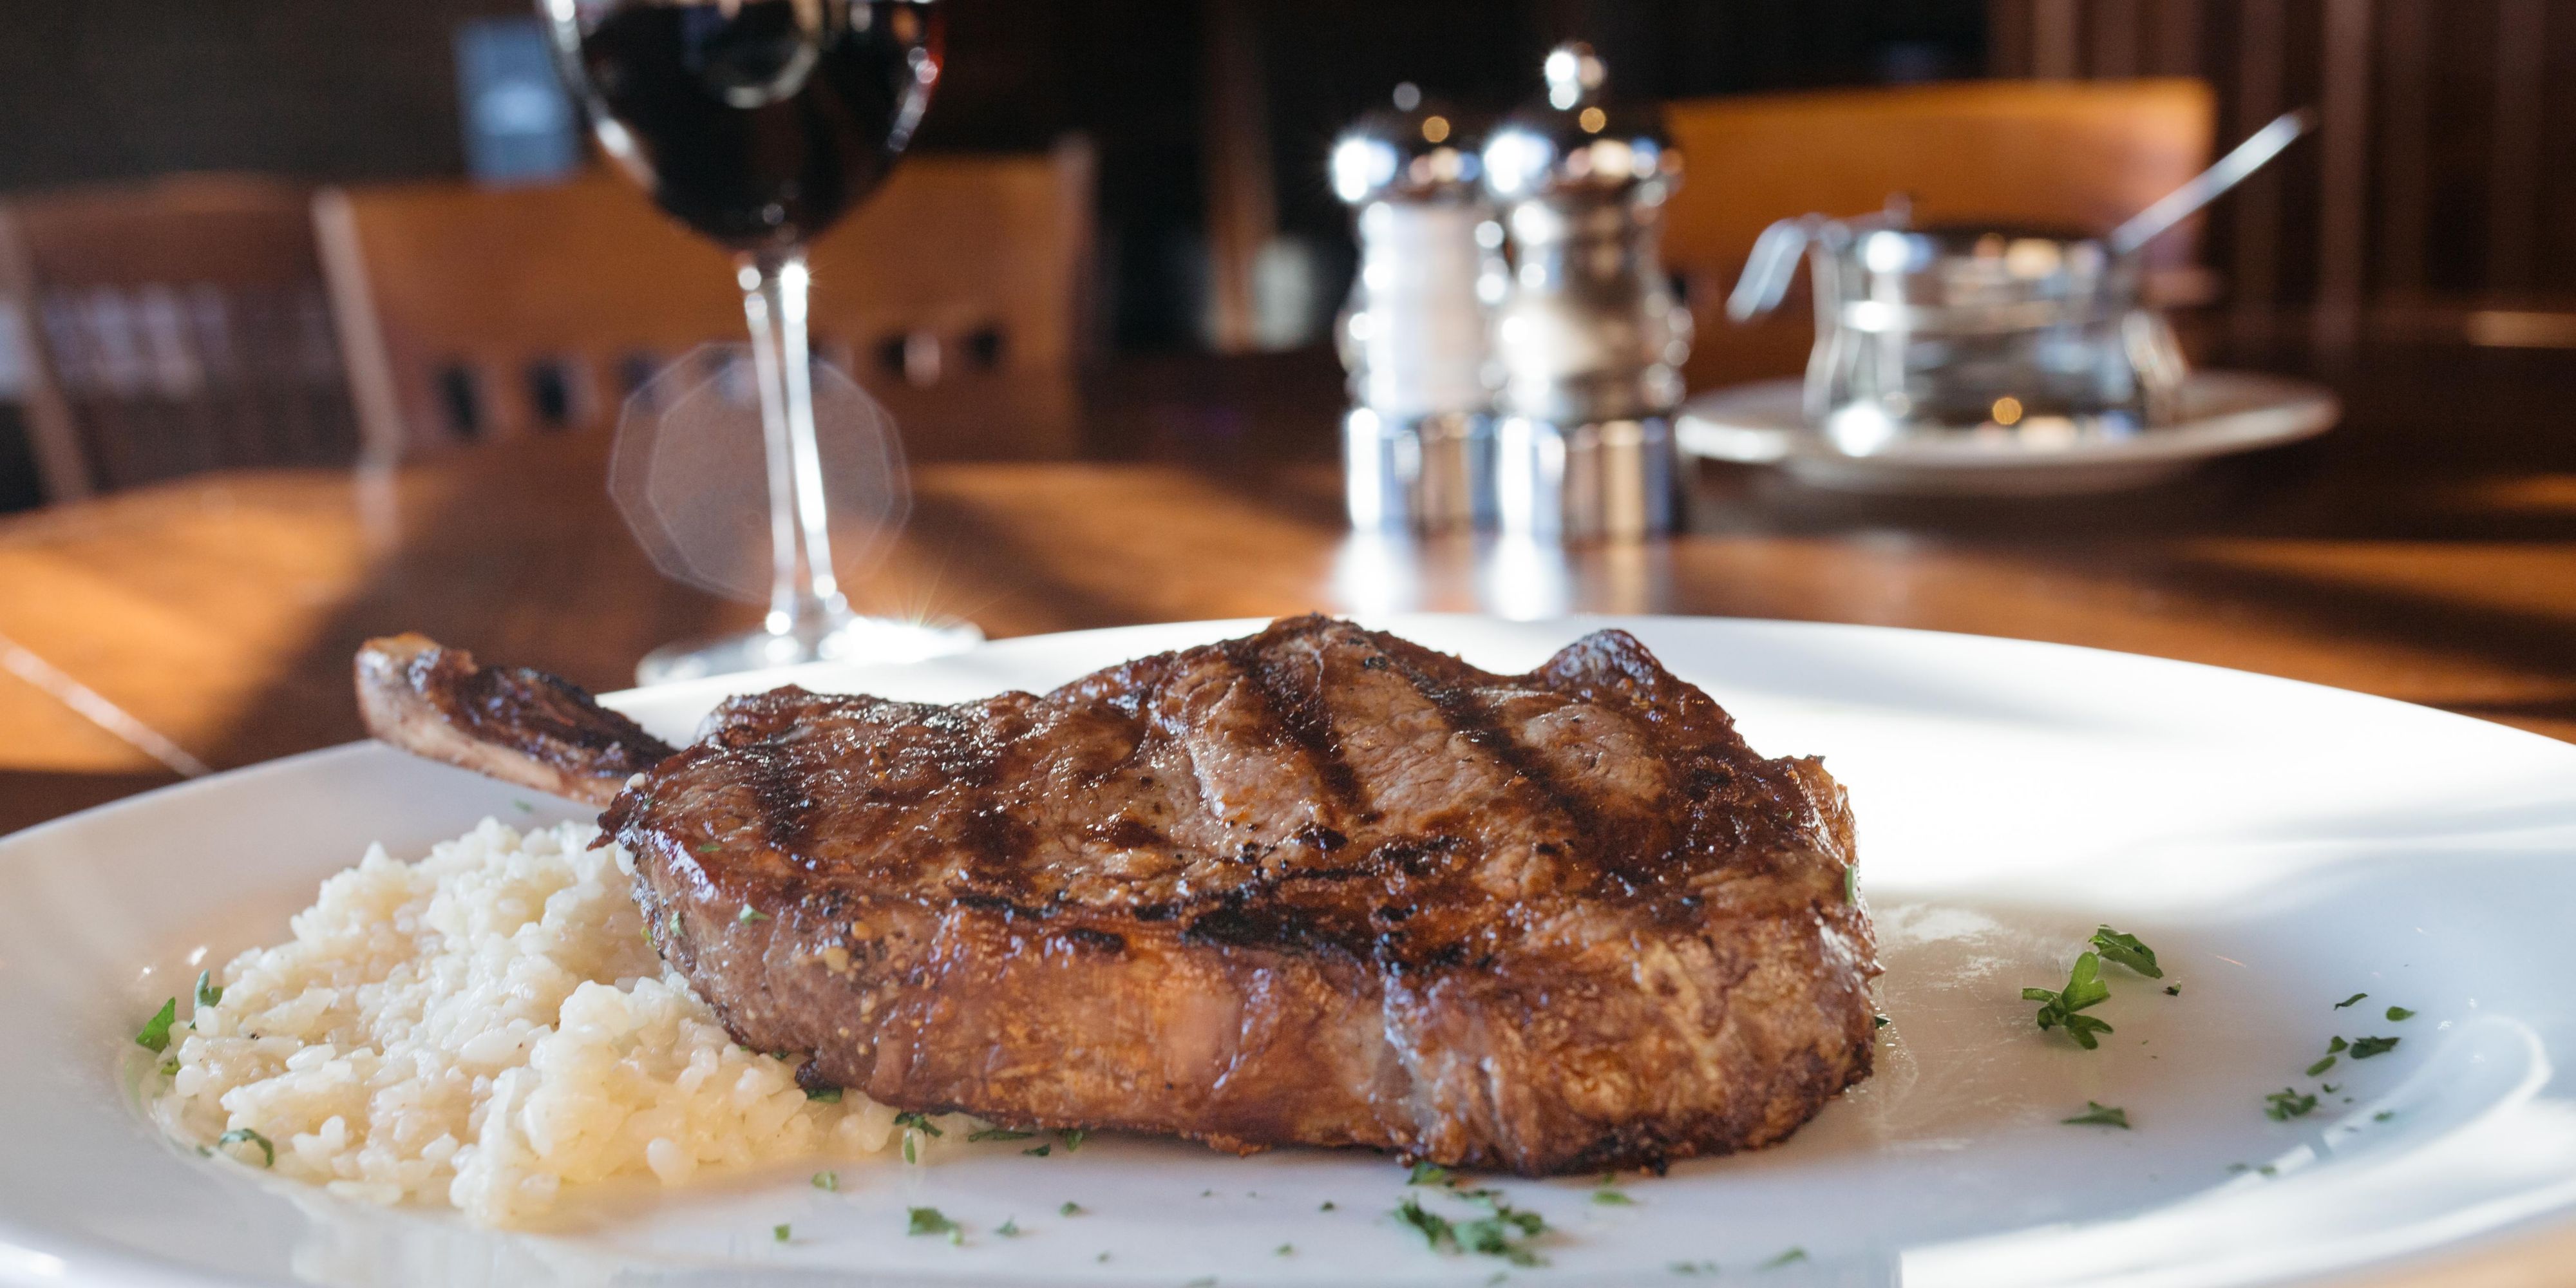 At Johnny’s, our steaks take center stage and are complemented by a gourmet assortment of Italian cuisine and seafood, alongside an expertly curated wine list. Whether you choose our famous Steak DeBurgo or the classic Chanel No. 5, you’re sure to satisfy your cravings. 
*Room service available. 